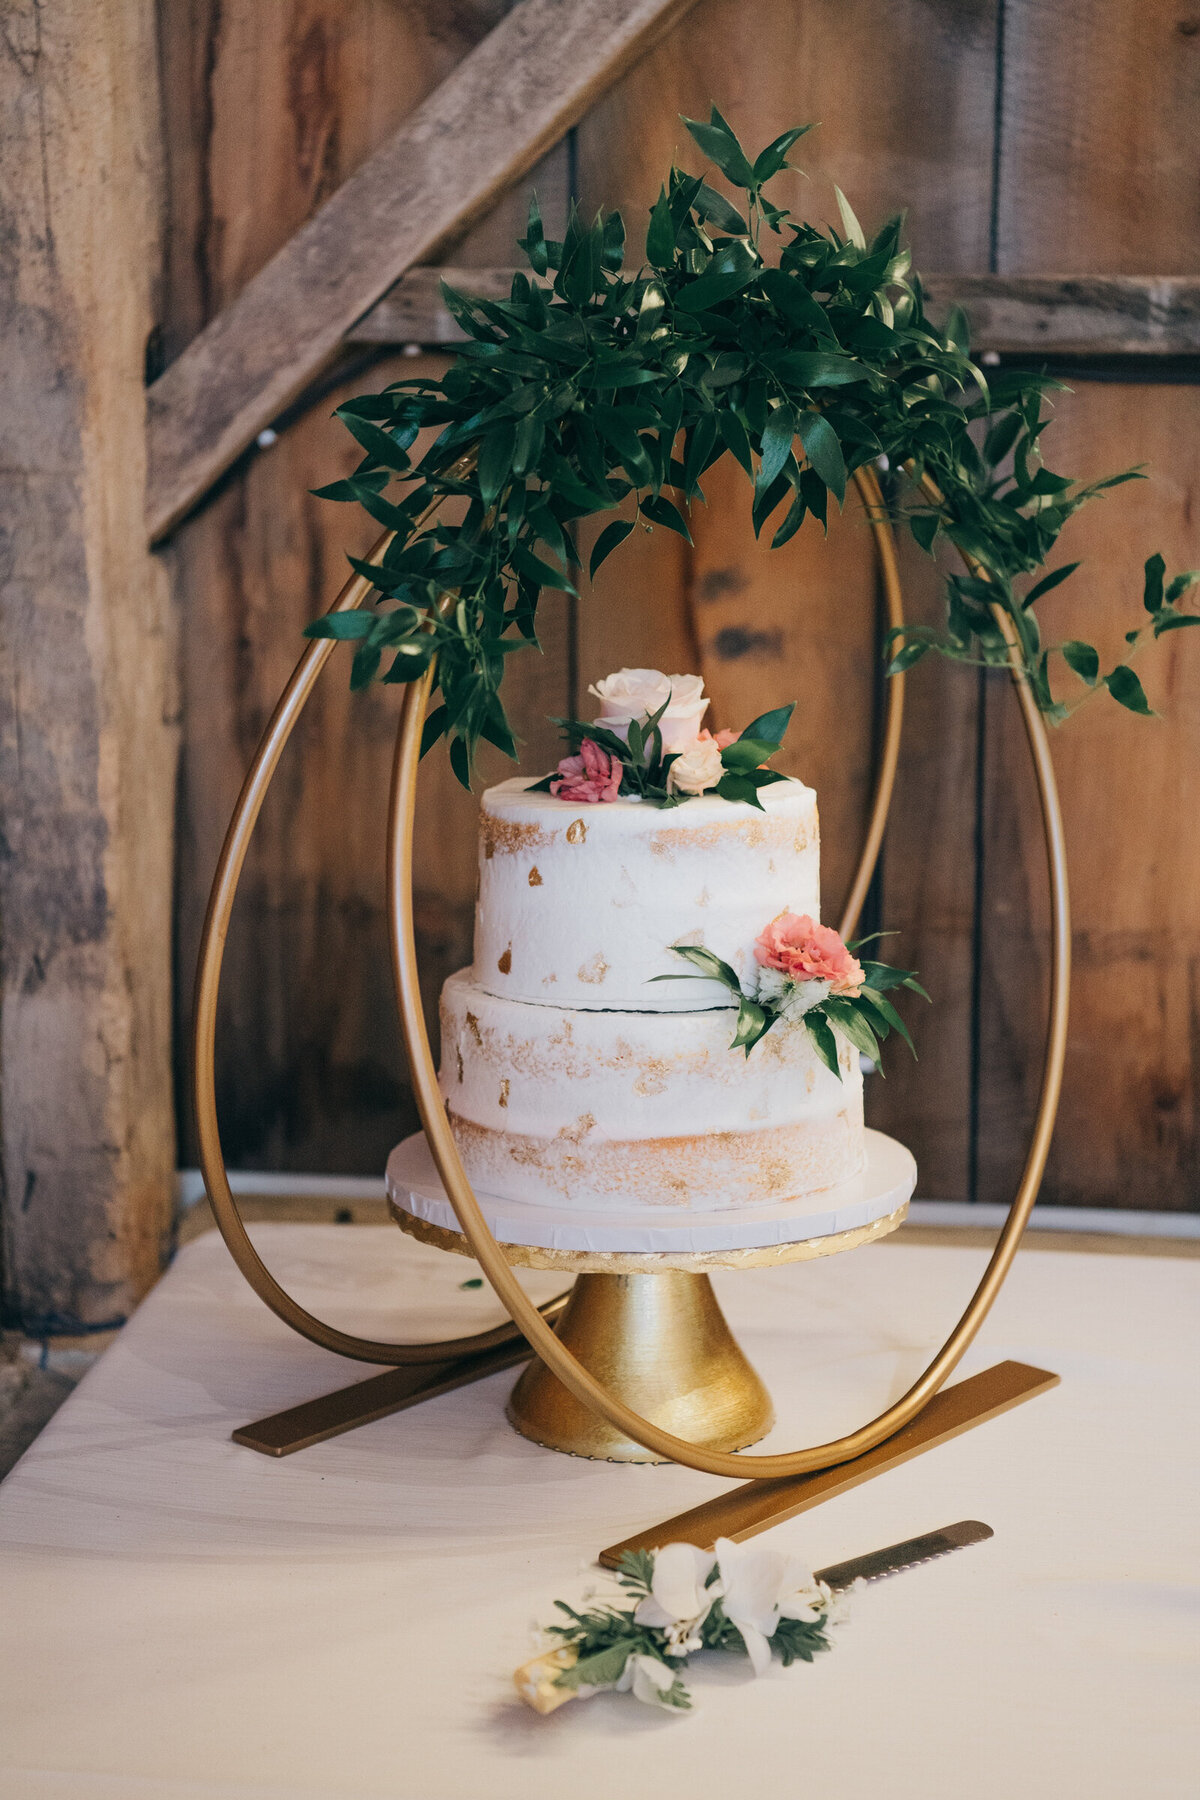 A simple, rustic white wedding cake with real flower accents